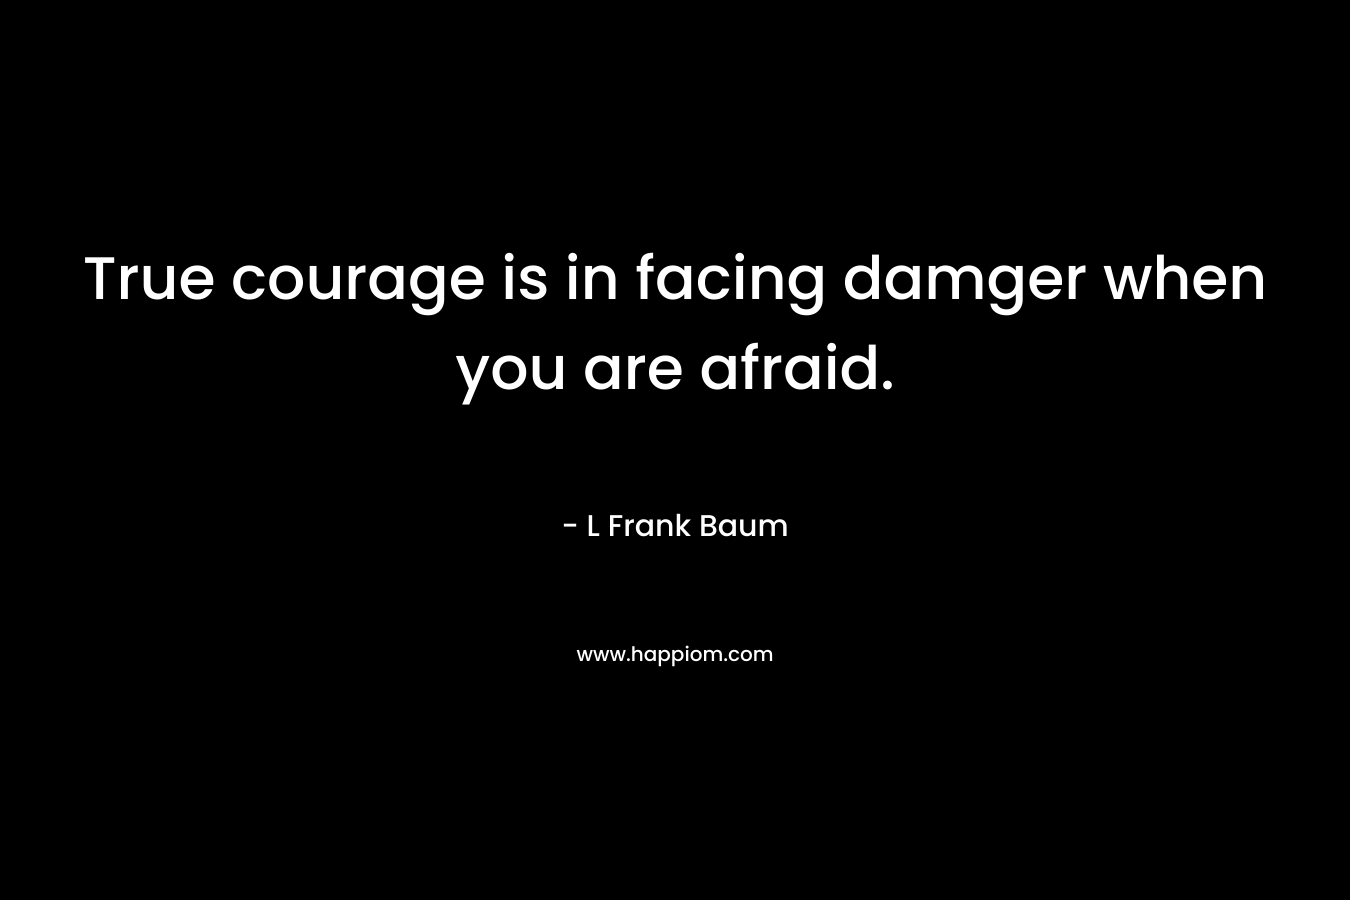 True courage is in facing damger when you are afraid. – L Frank Baum